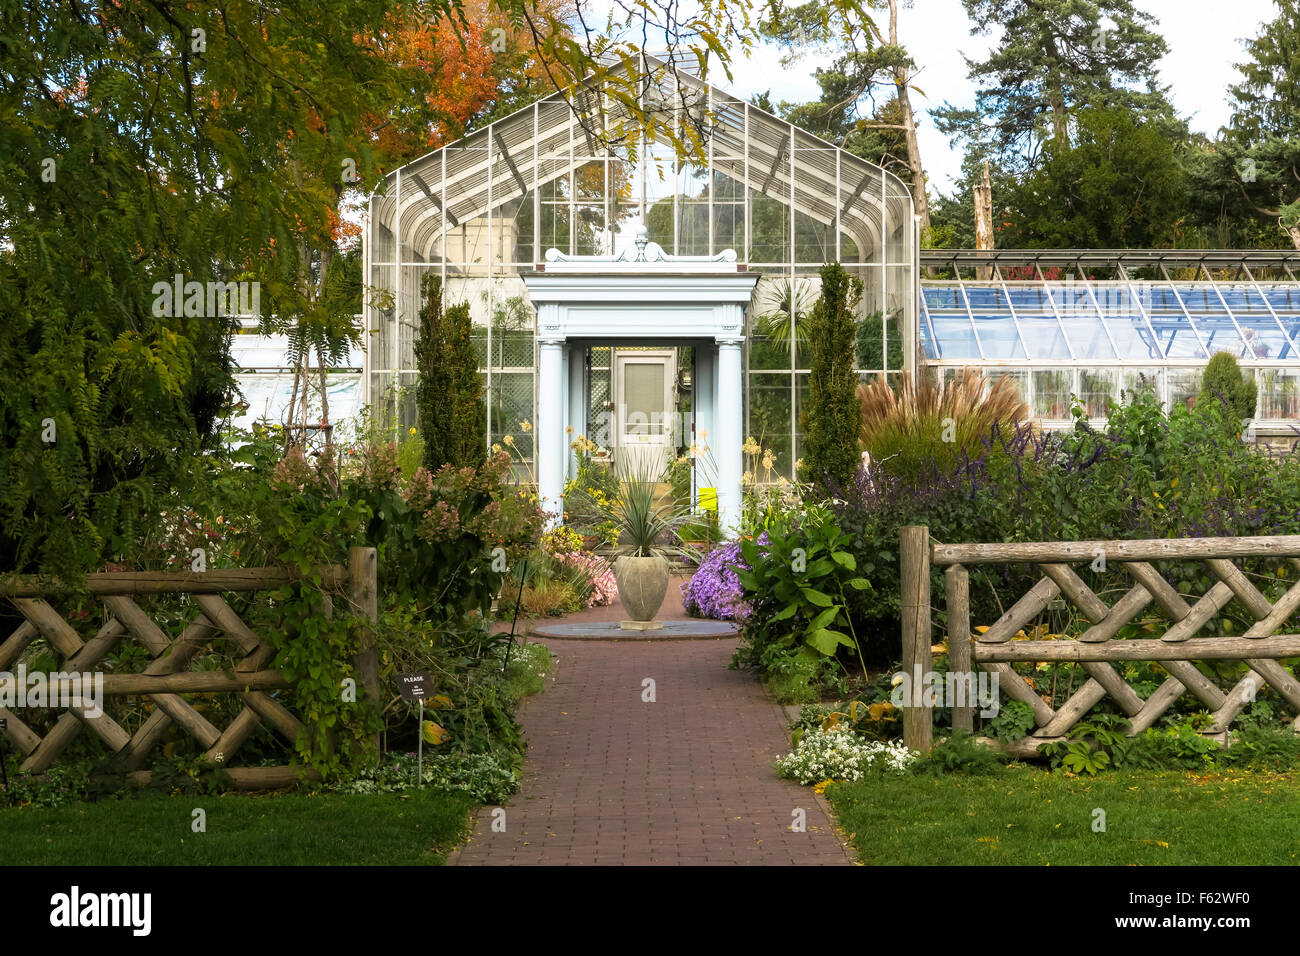 Marco Polo Stufano Conservatory At Wave Hill Public Garden In The